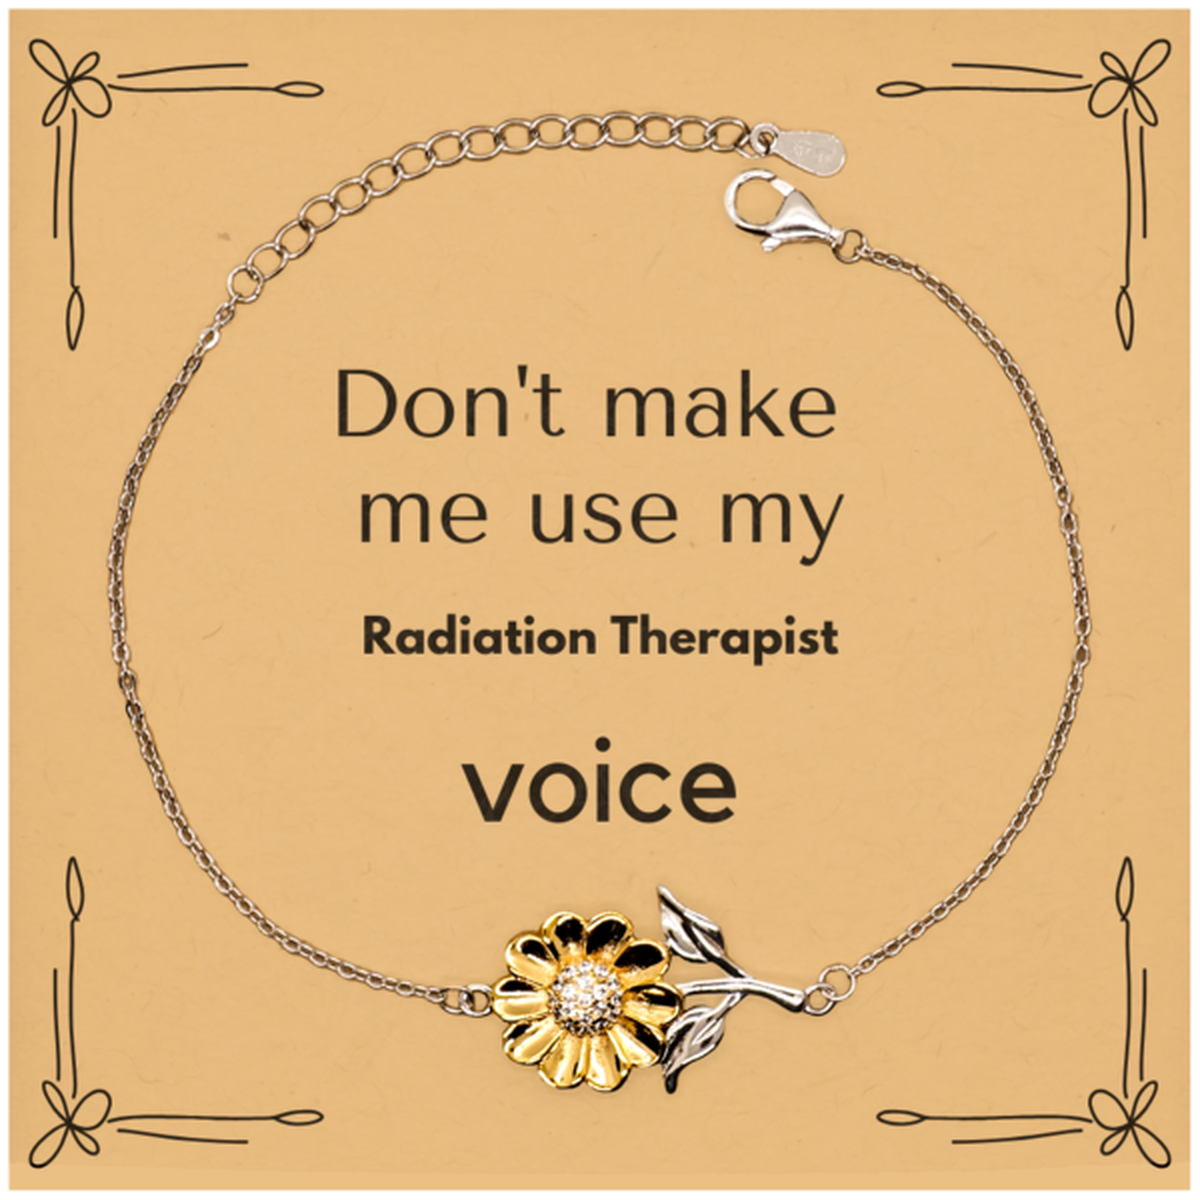 Don't make me use my Radiation Therapist voice, Sarcasm Radiation Therapist Card Gifts, Christmas Radiation Therapist Sunflower Bracelet Birthday Unique Gifts For Radiation Therapist Coworkers, Men, Women, Colleague, Friends